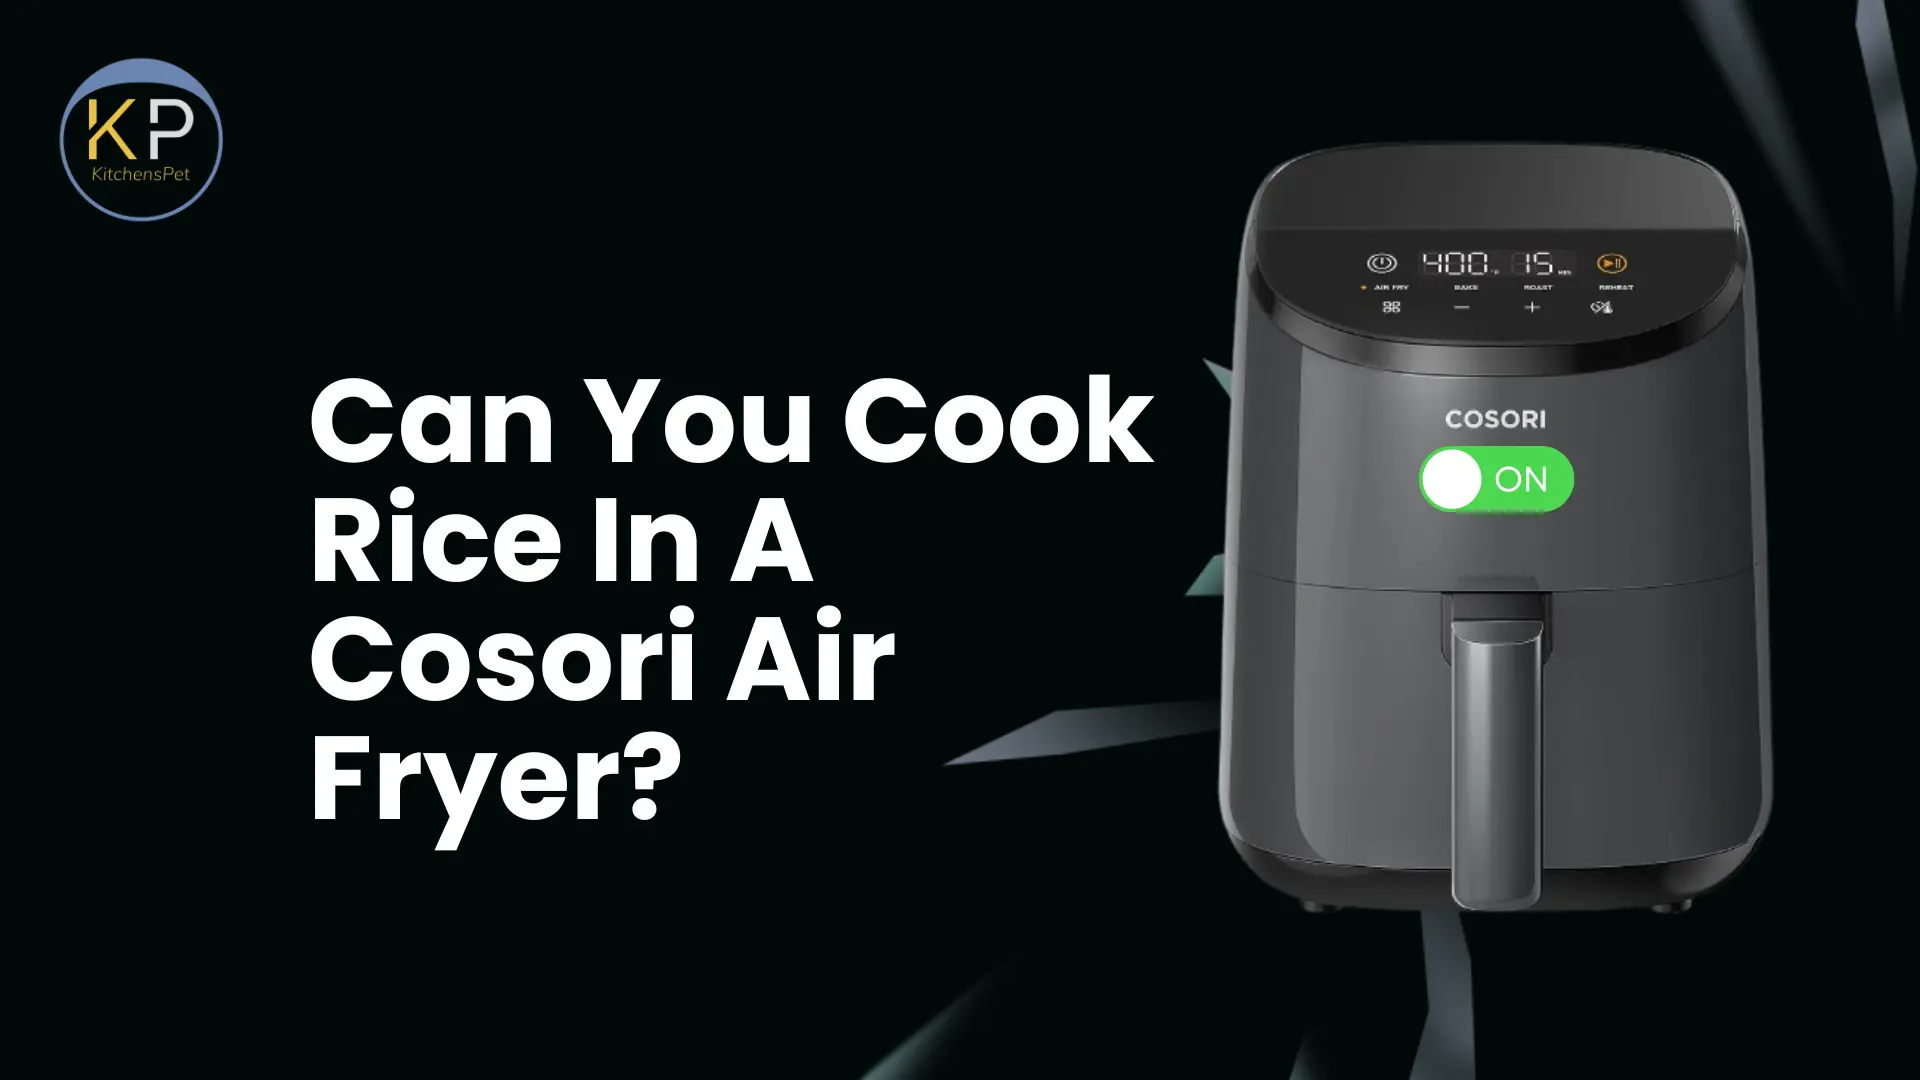 Can you cook rice in a Cosori air fryer